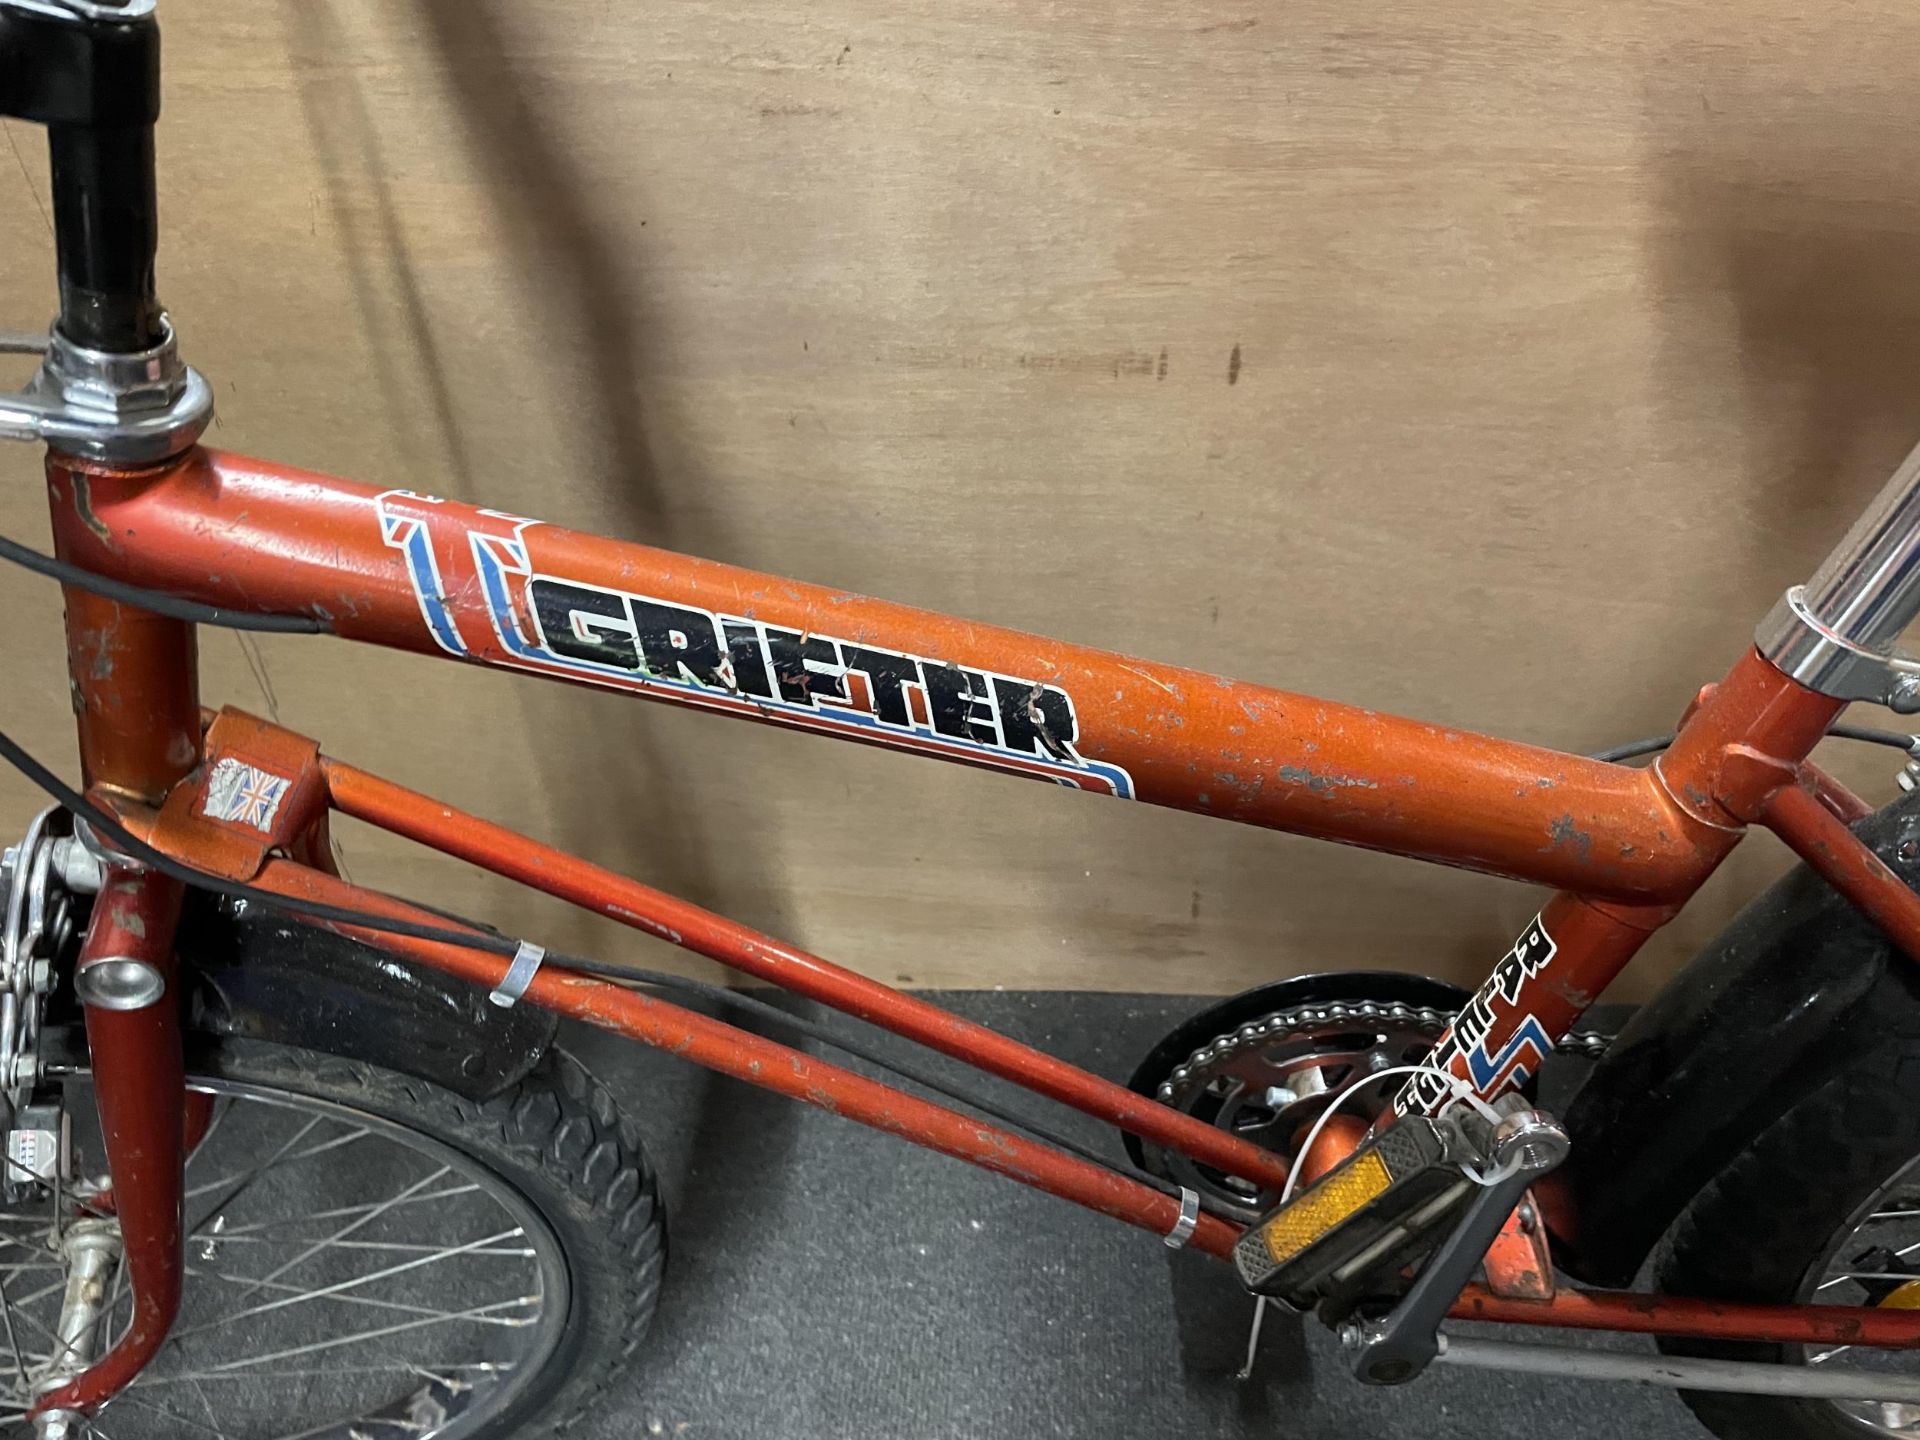 A RETRO 1978 MARK 1 RED RALEIGH GRIFTER BIKE - Image 2 of 5